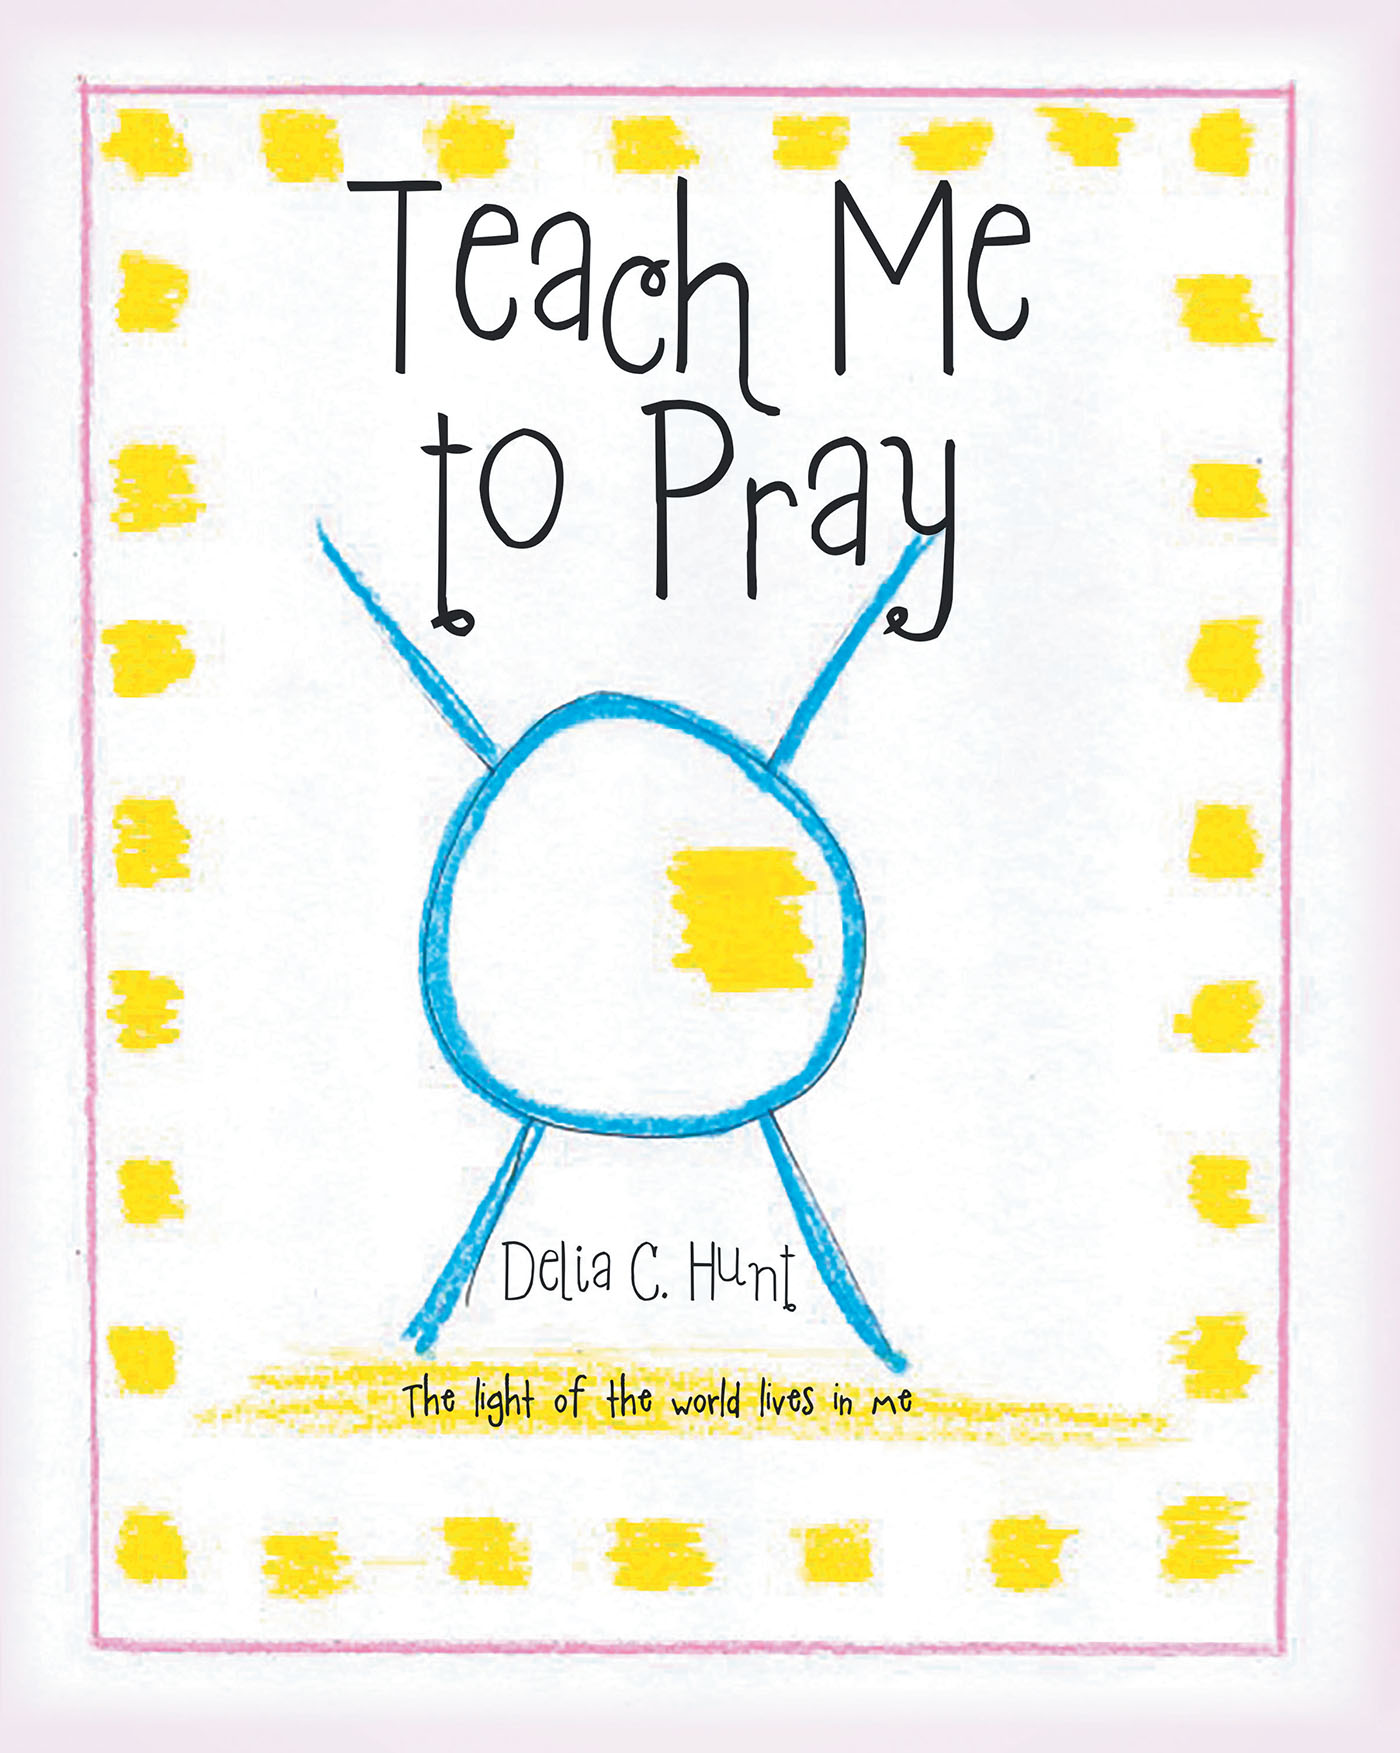 Author Delia C. Hunt’s New Book, “Teach Me to Pray: The light of the world lives in me,” Reveals How God is Always Present and Available to His Followers Through Prayer